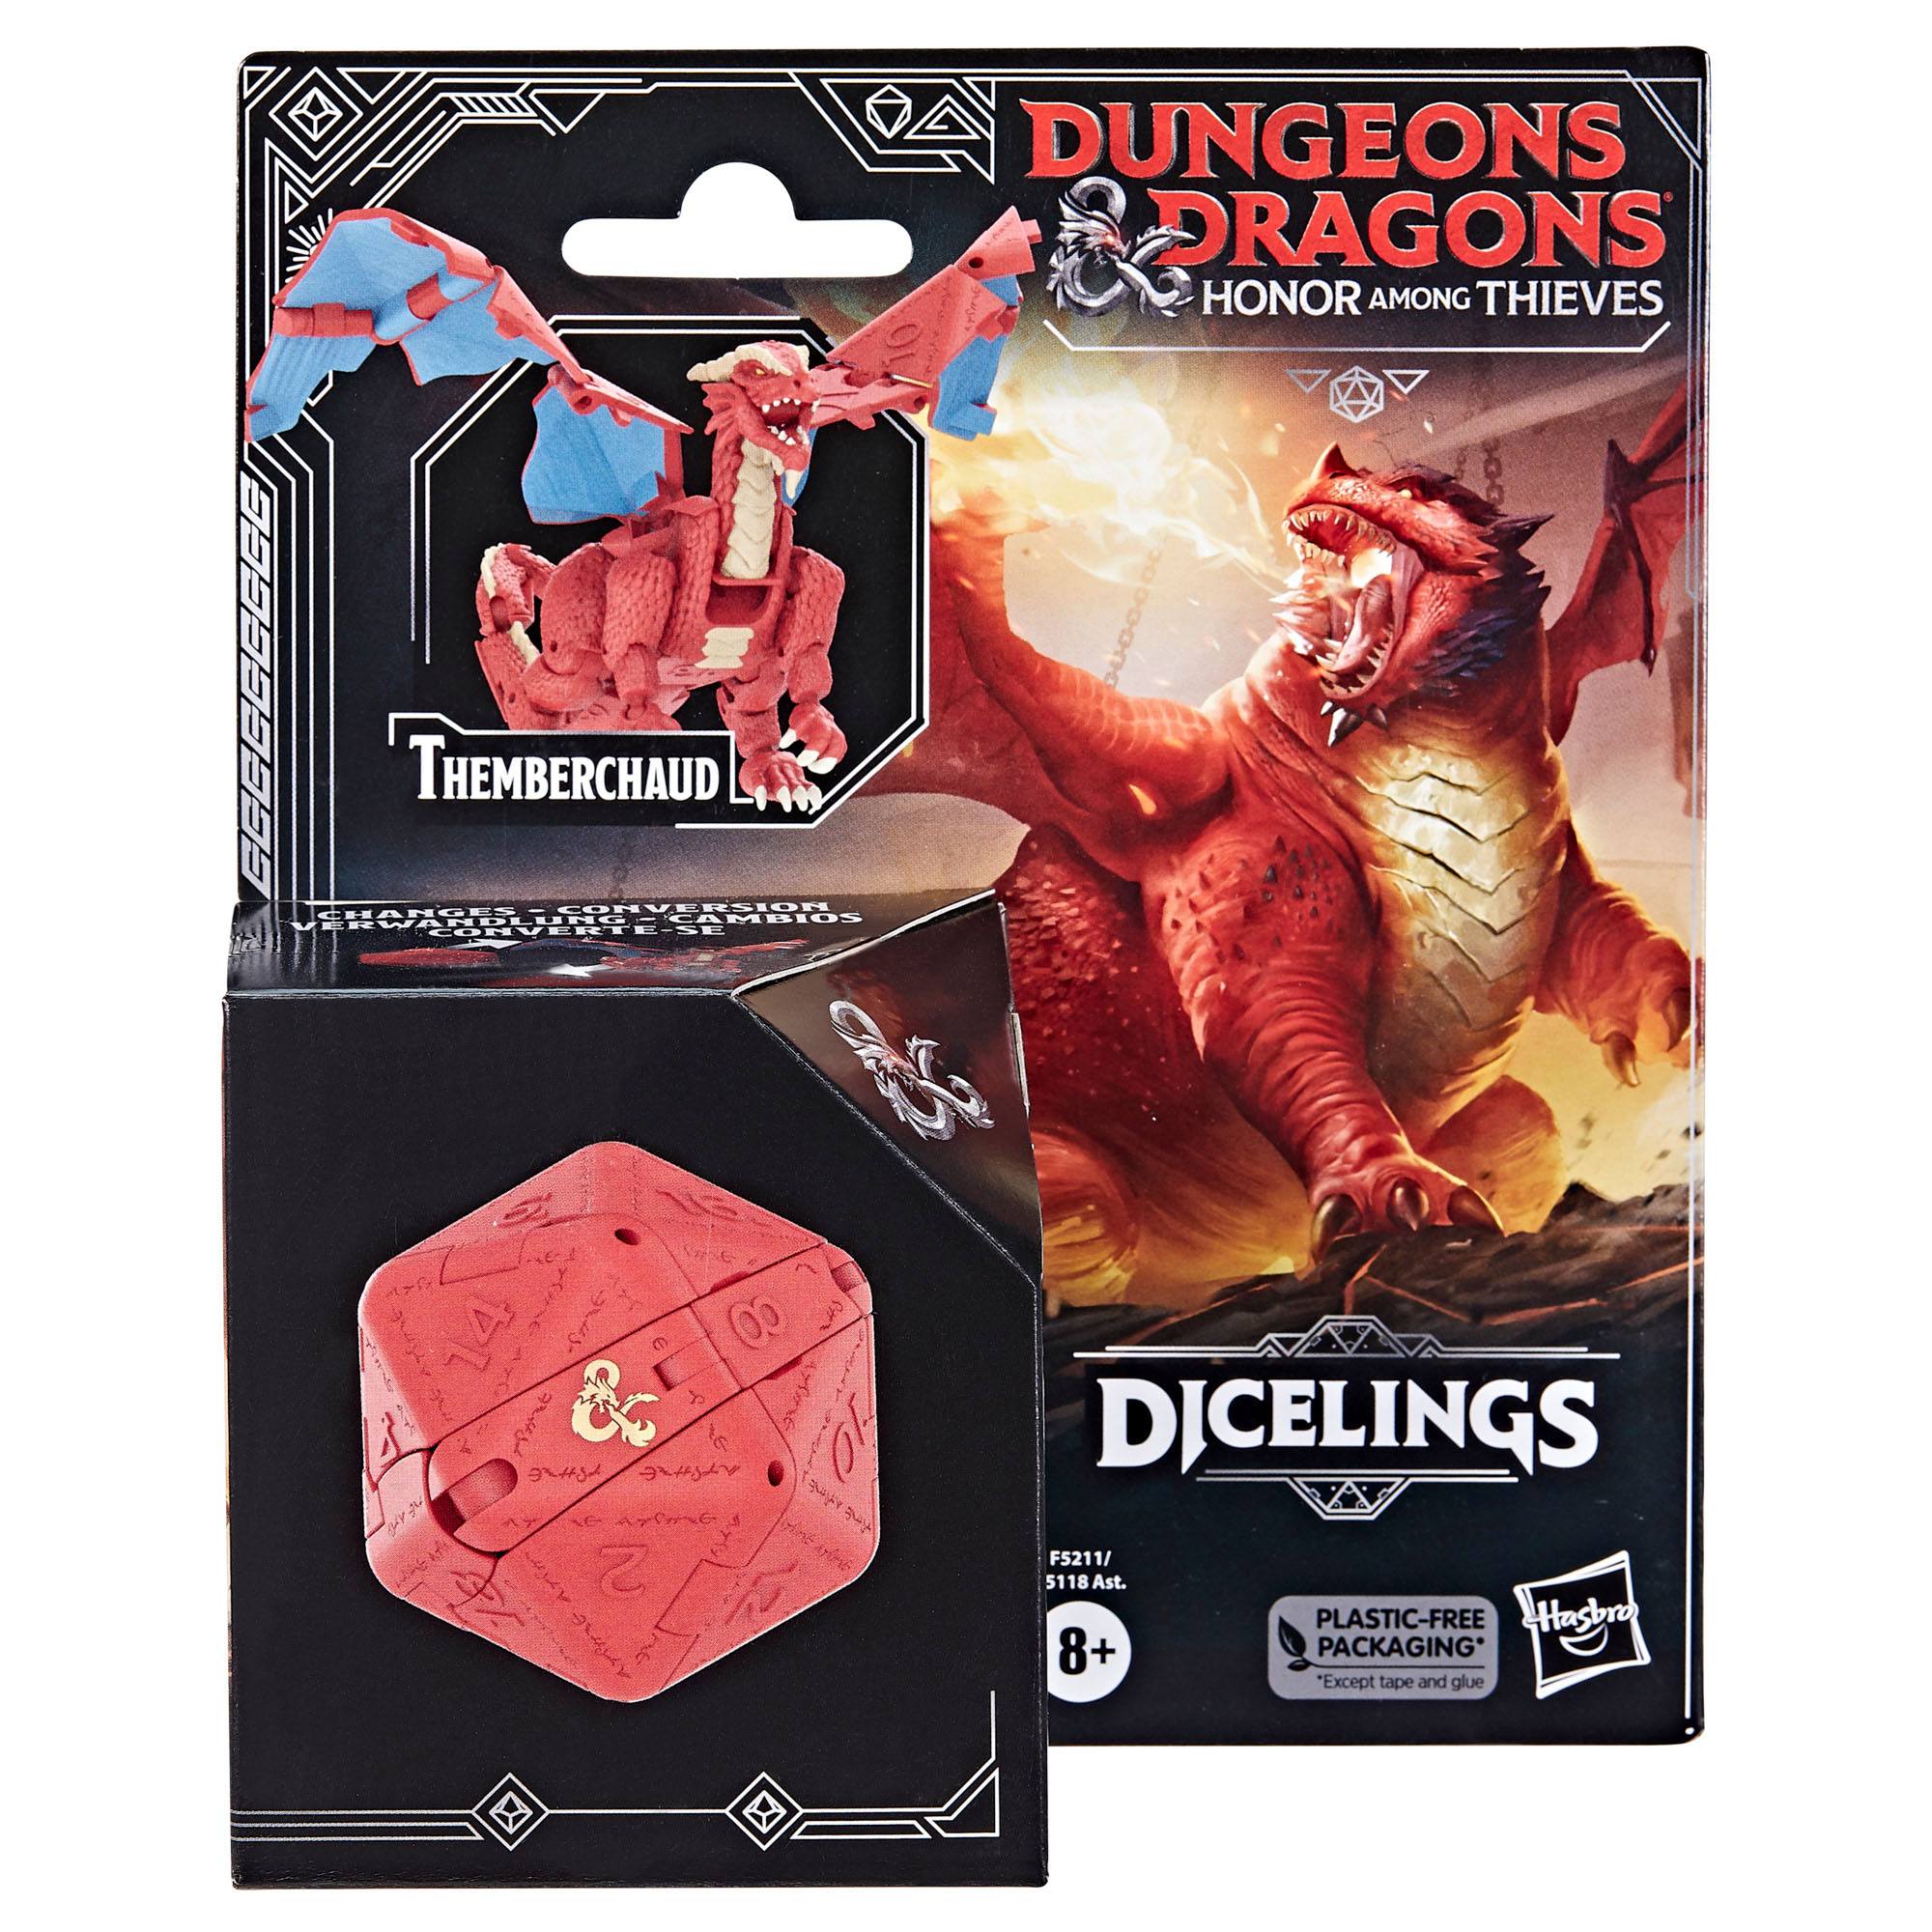 Dungeons & Dragons: Honor Among Thieves Dicelings Action Figure Themberchaud - Loaded Dice Barry Vale of Glamorgan CF64 3HD